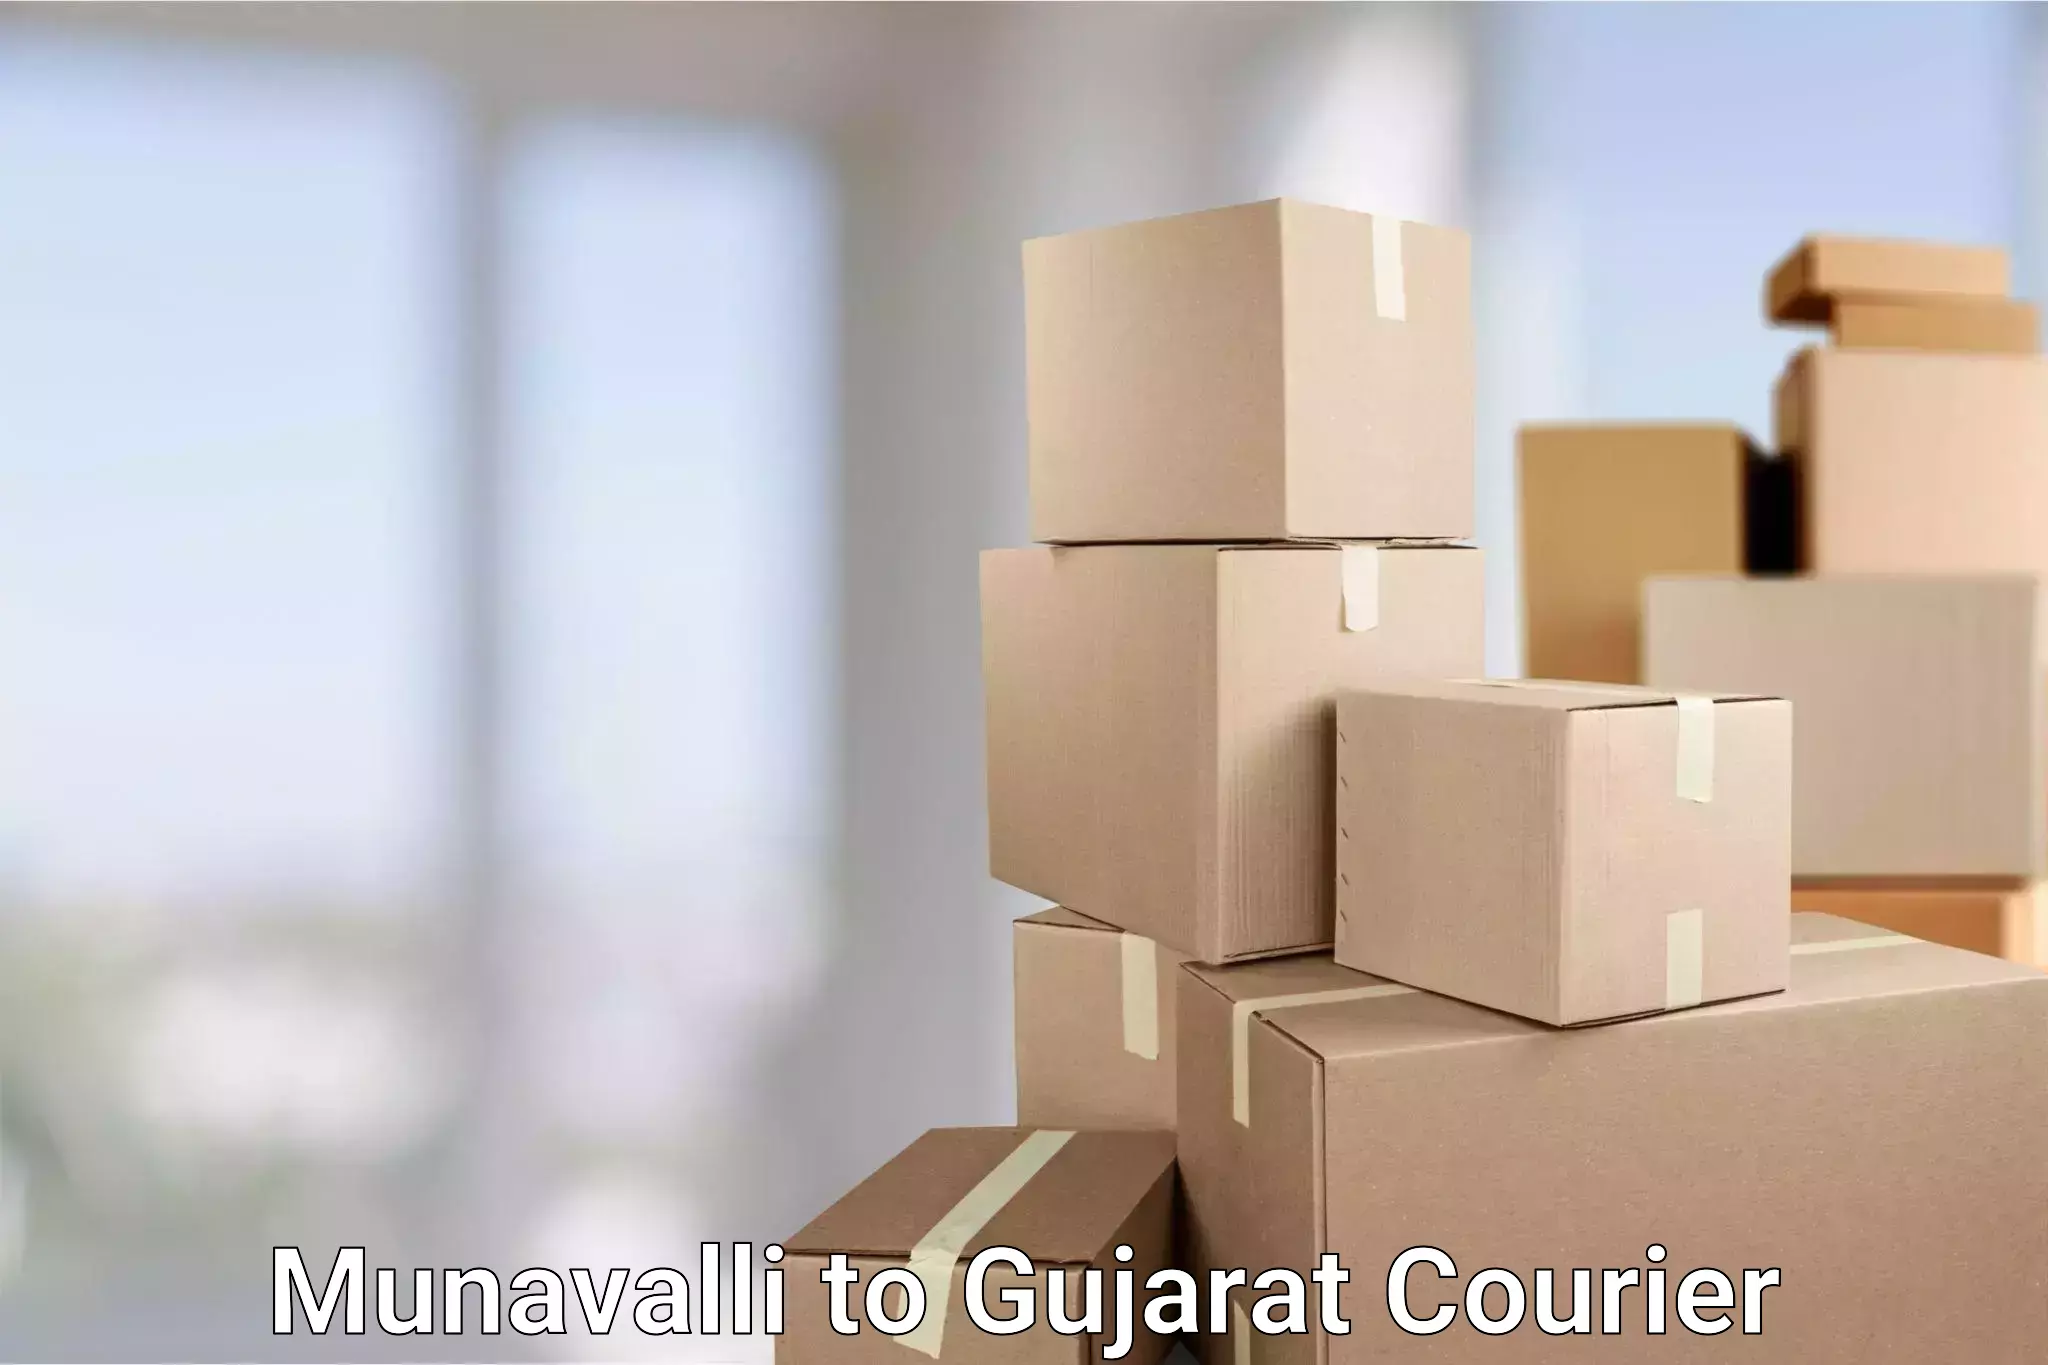 Express delivery capabilities Munavalli to GIDC